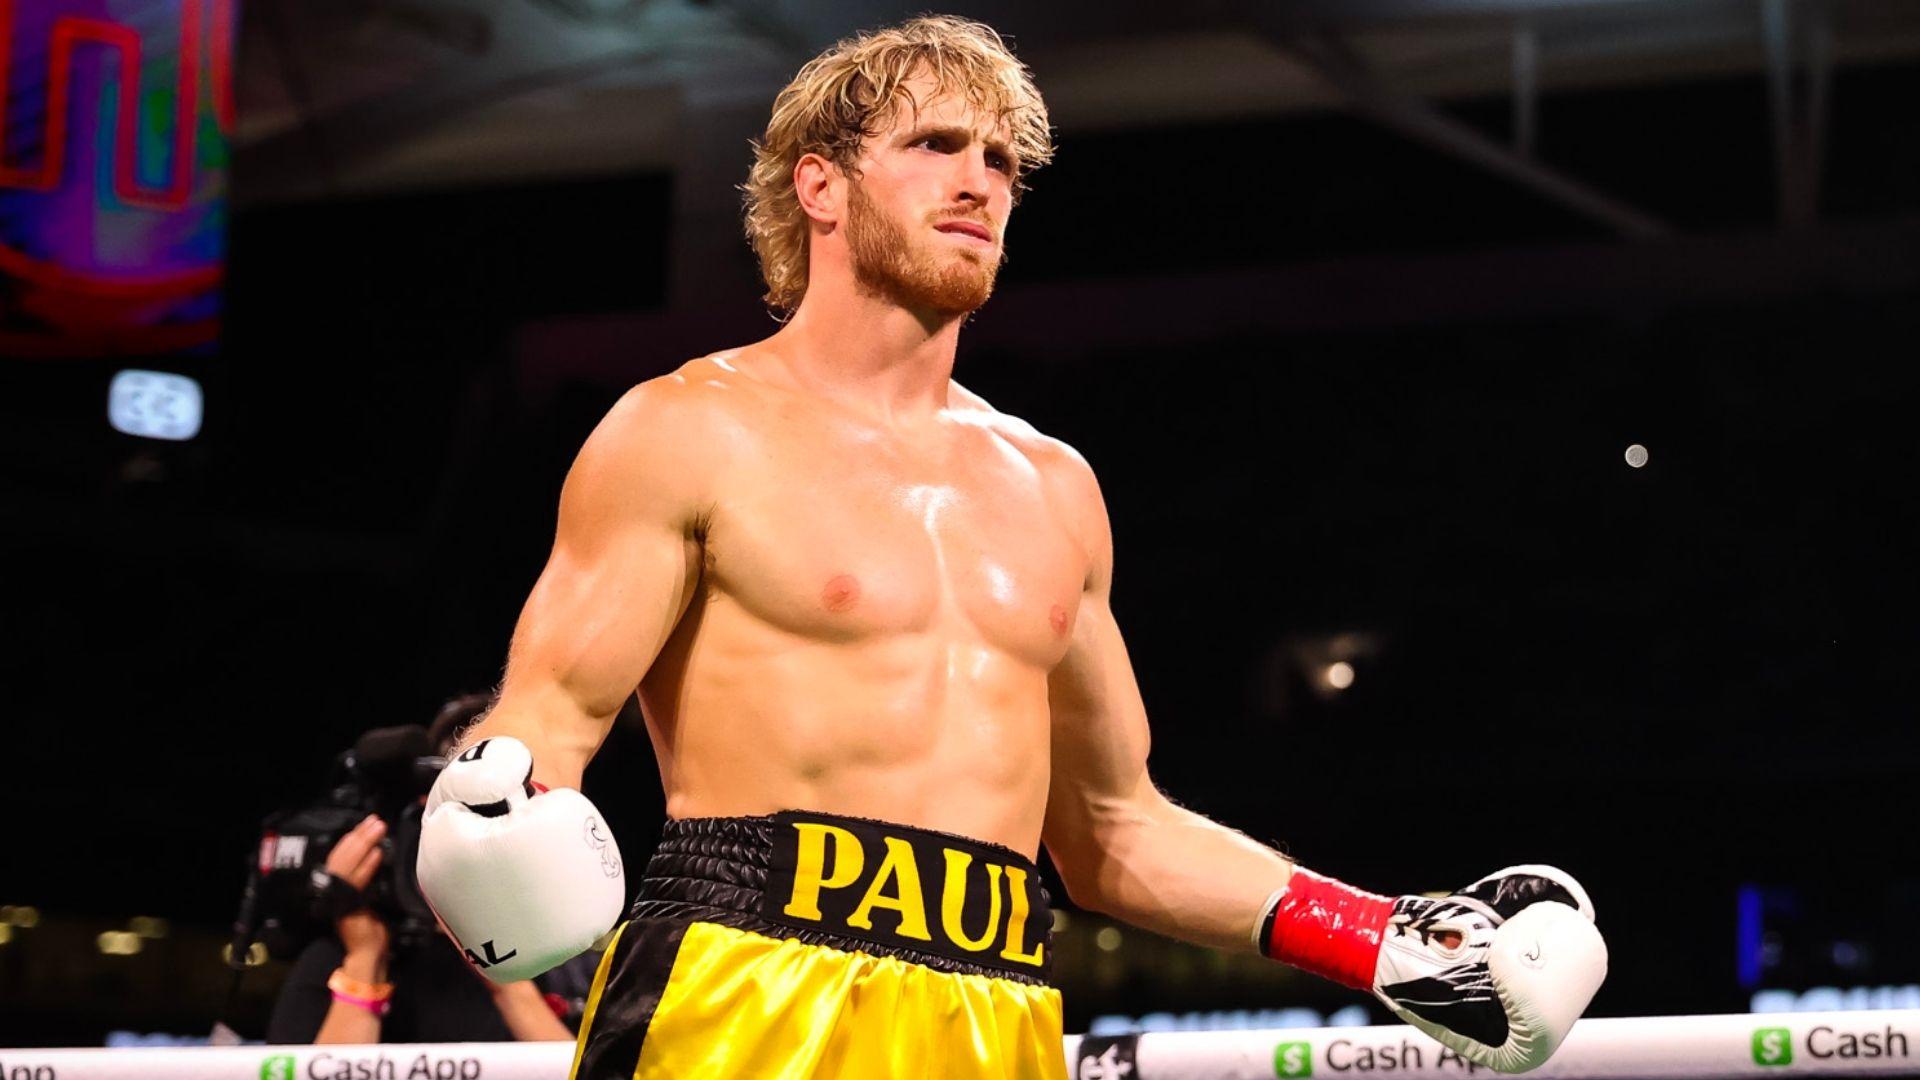 Logan Paul posing in boxing ring with white gloves and yellow trunks